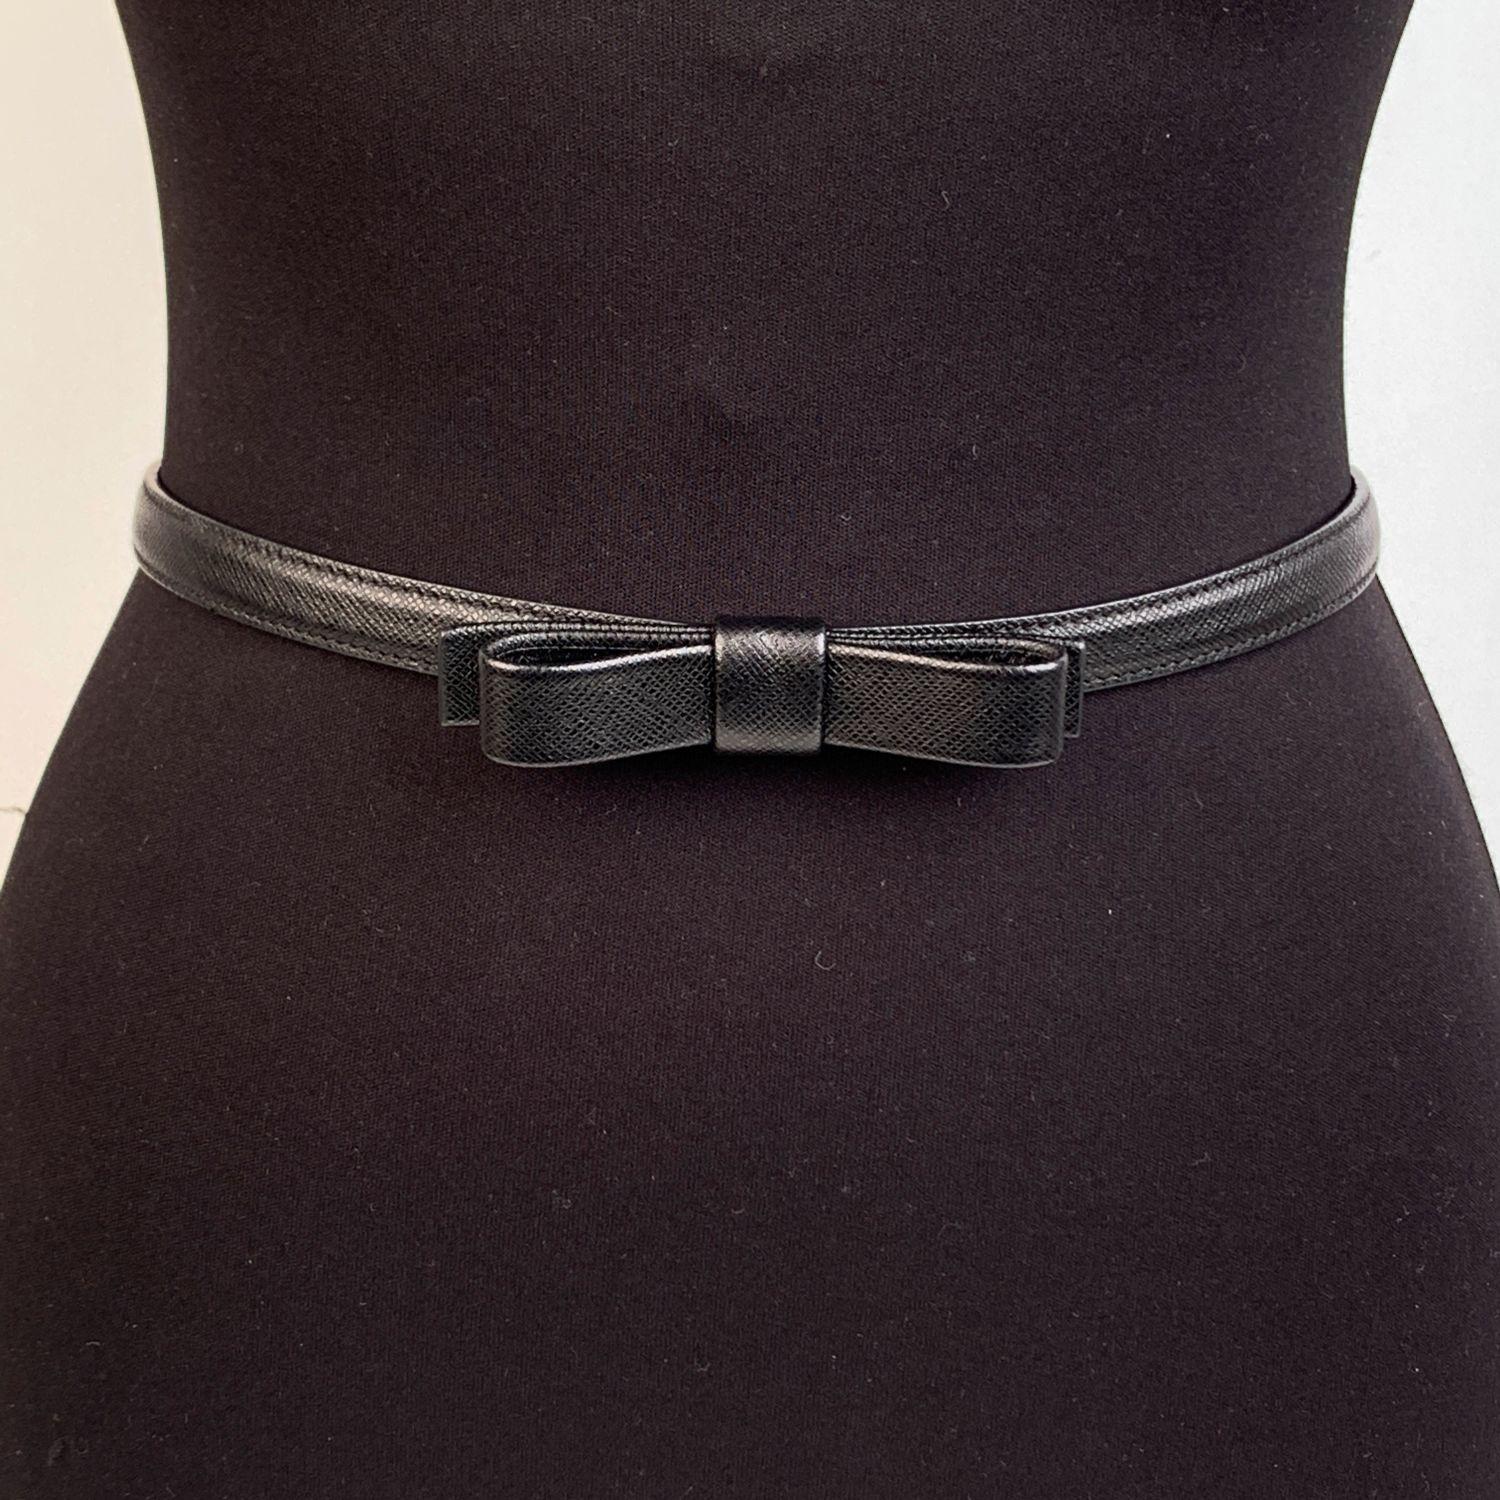 Prada skinny belt, crafted in black Saffiano leather. It features bow detailing on the front. Gold metal square buckle. 'Prada - made in Italy' engraved on the back. 5 holes adjustament. Total length (Buckles included): 37.75 inches - 96 cm. Size